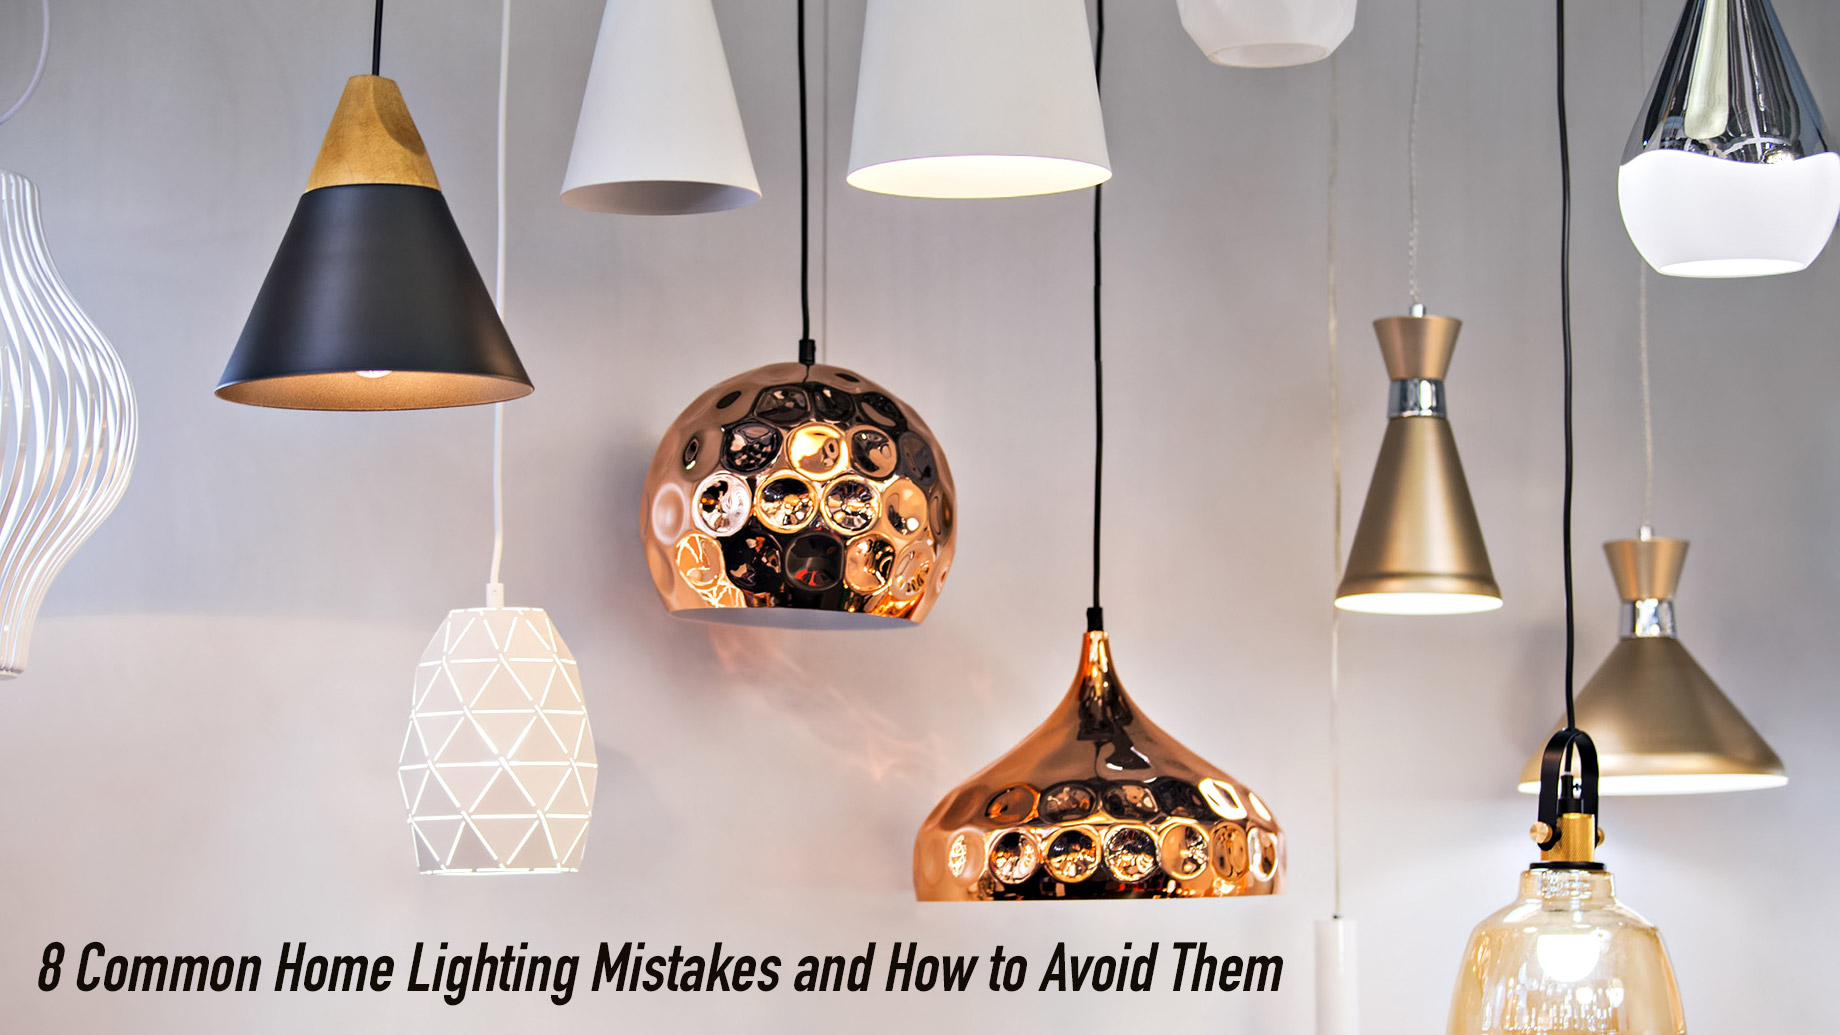 8 Common Home Lighting Mistakes and How to Avoid Them